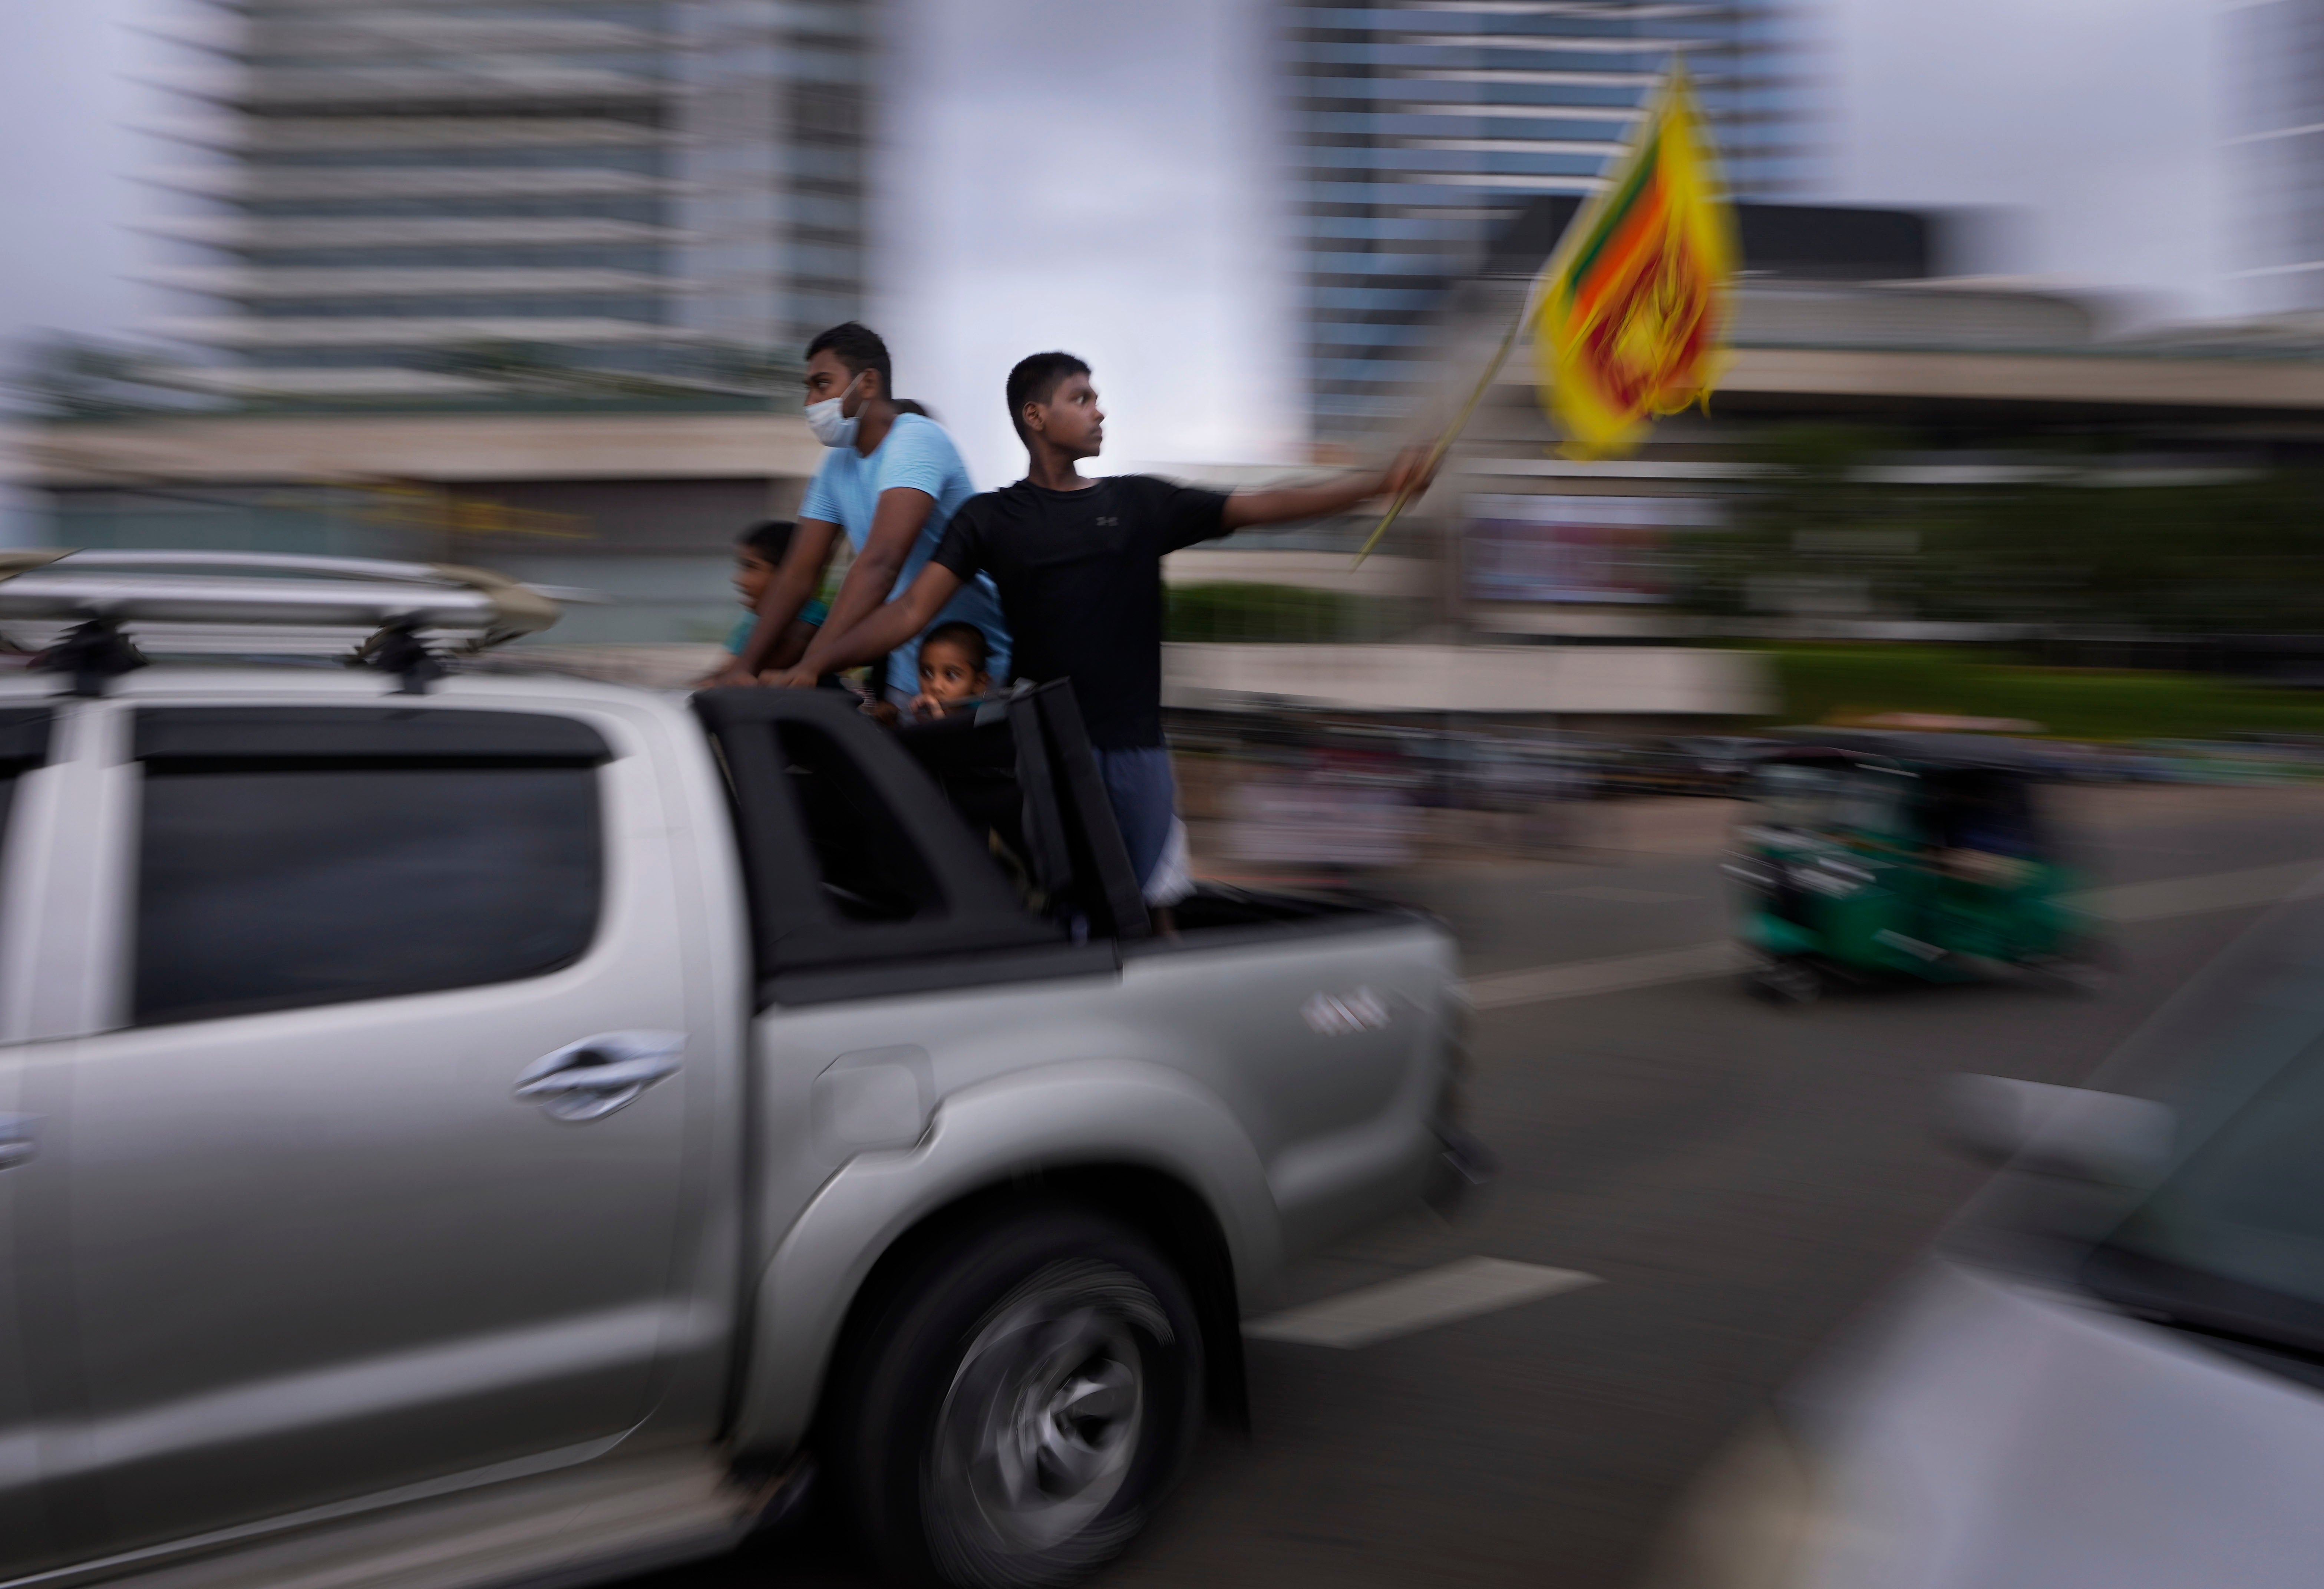 Sri Lankans wave a national flag during Tuesday’s curfew in Colombo